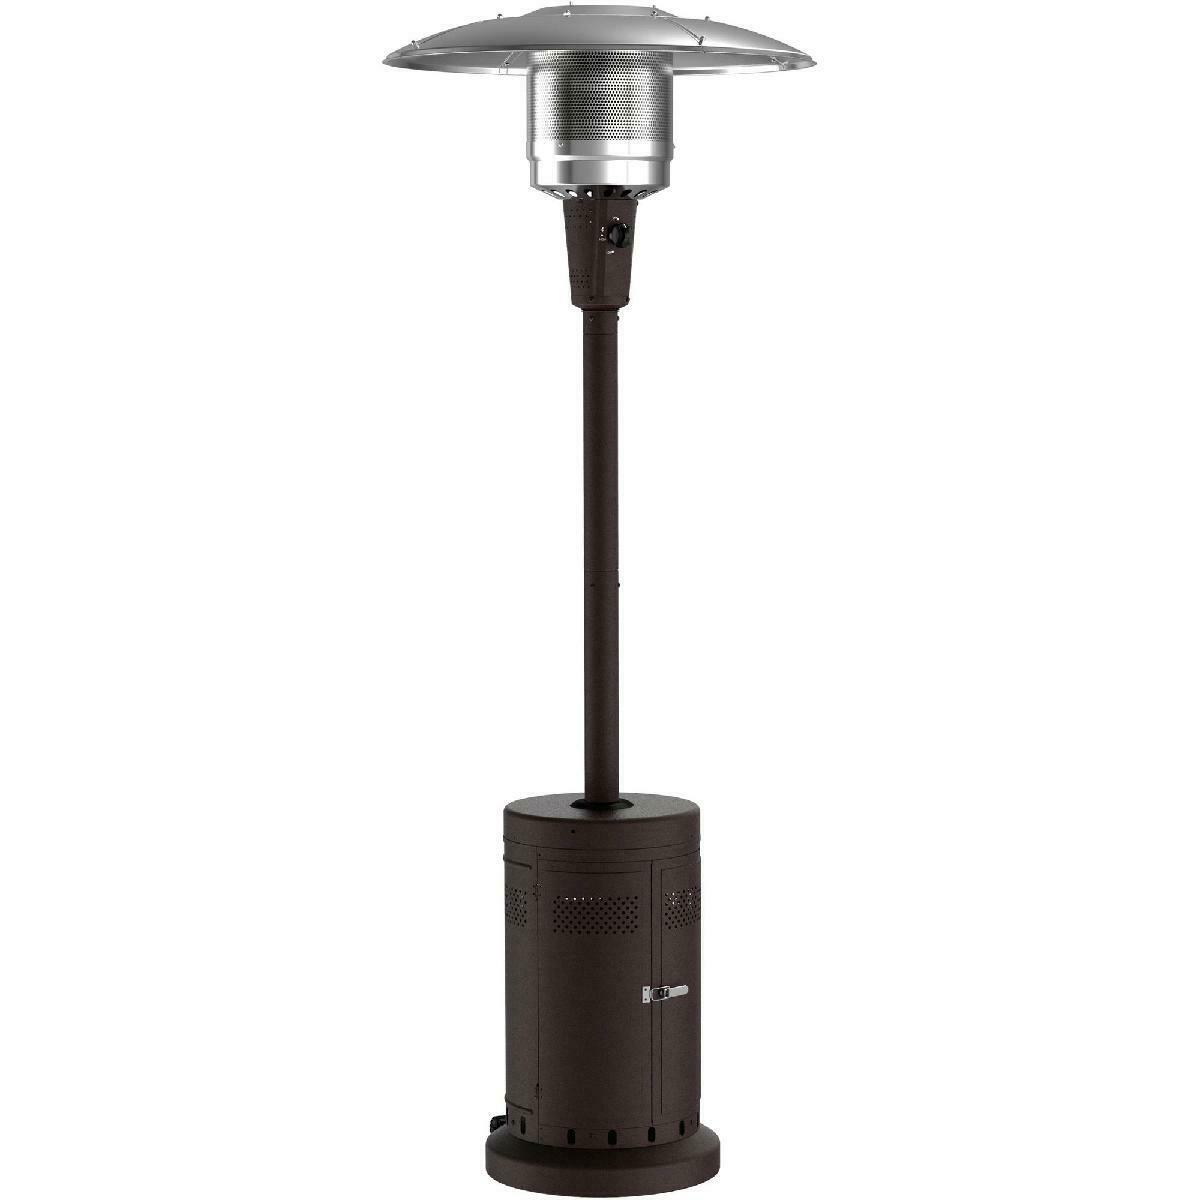 Outdoor Patio Heater 40,000 BTU Large Portable Tower Heater Oscillating W Wheels - Large Outdoor Patio Heater - Outdoor Propane Patio Heater with Wheels